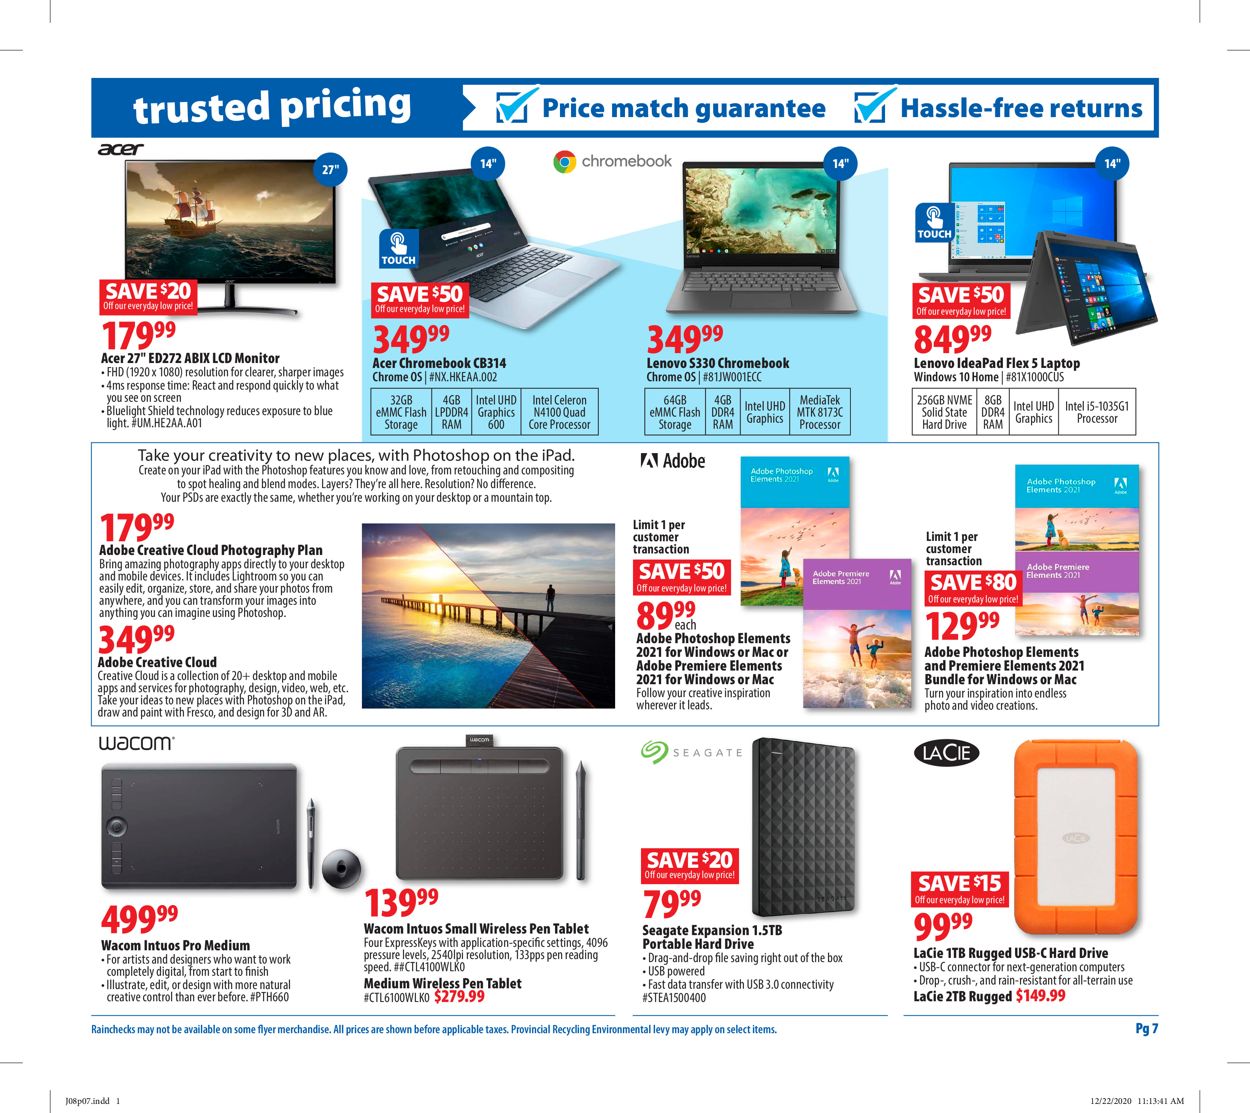 London Drugs Flyer from 01/08/2021